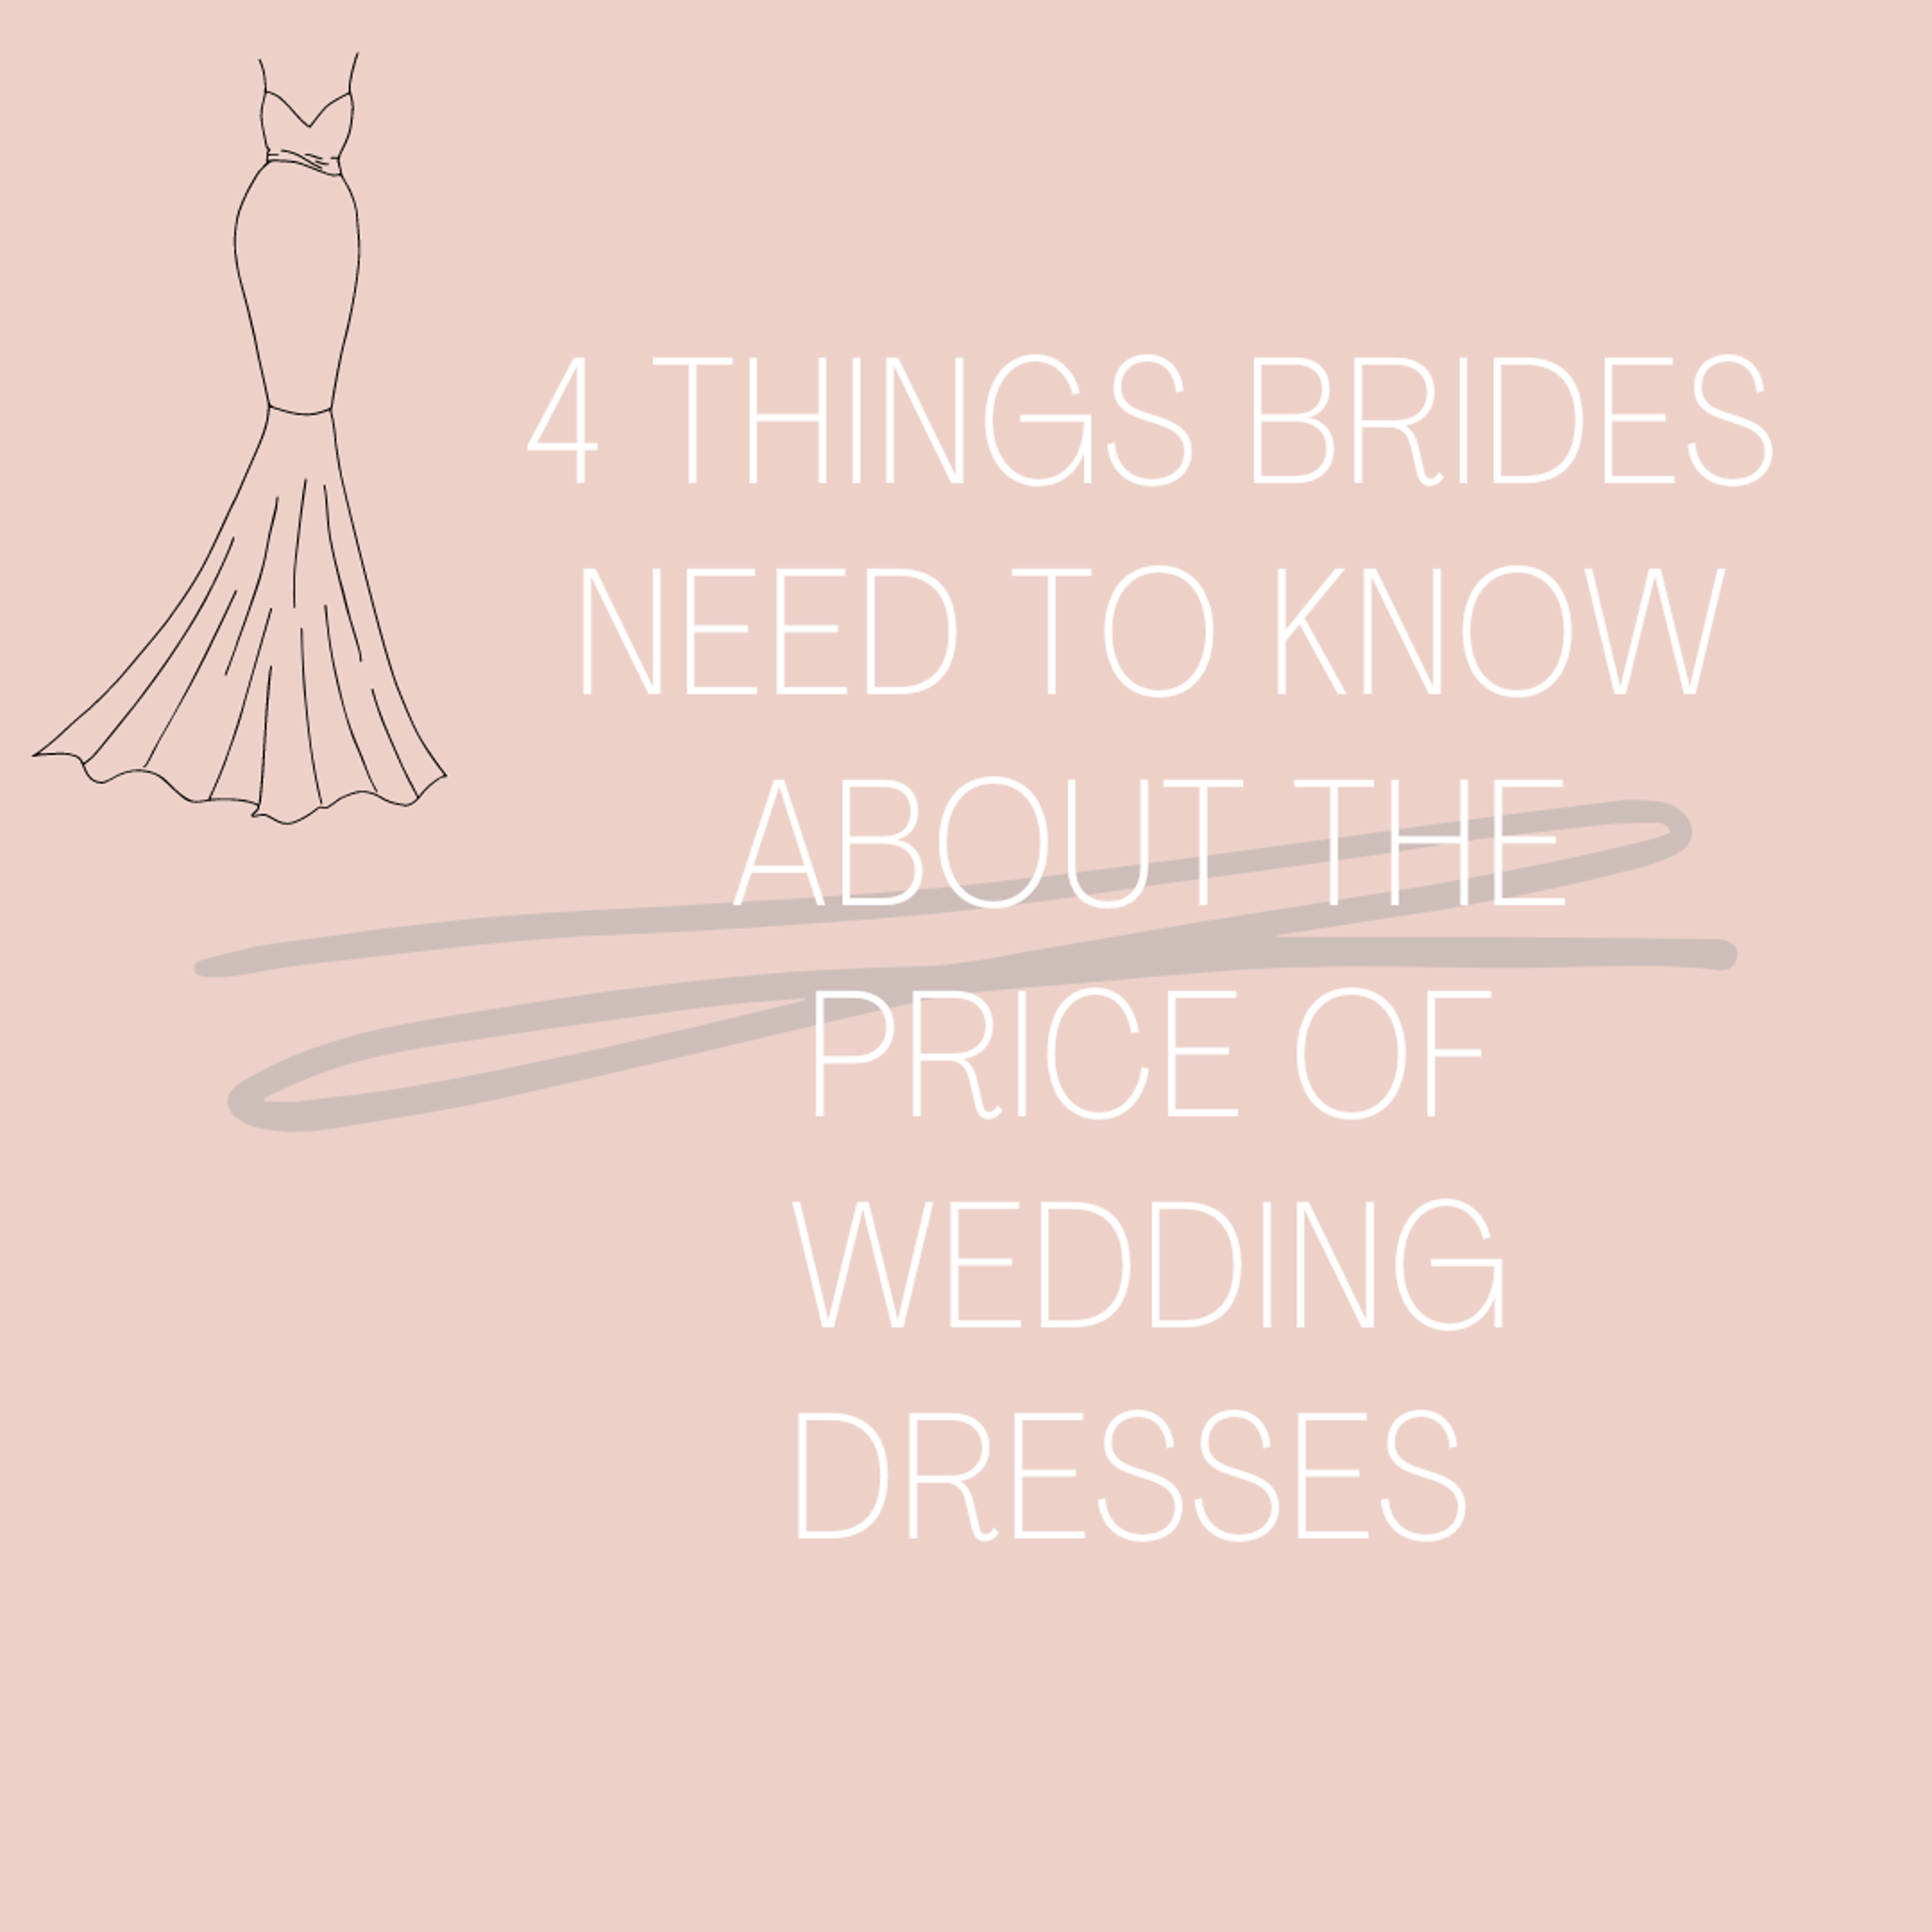 4 Things Brides Need To Know About The Price Of Wedding Dresses